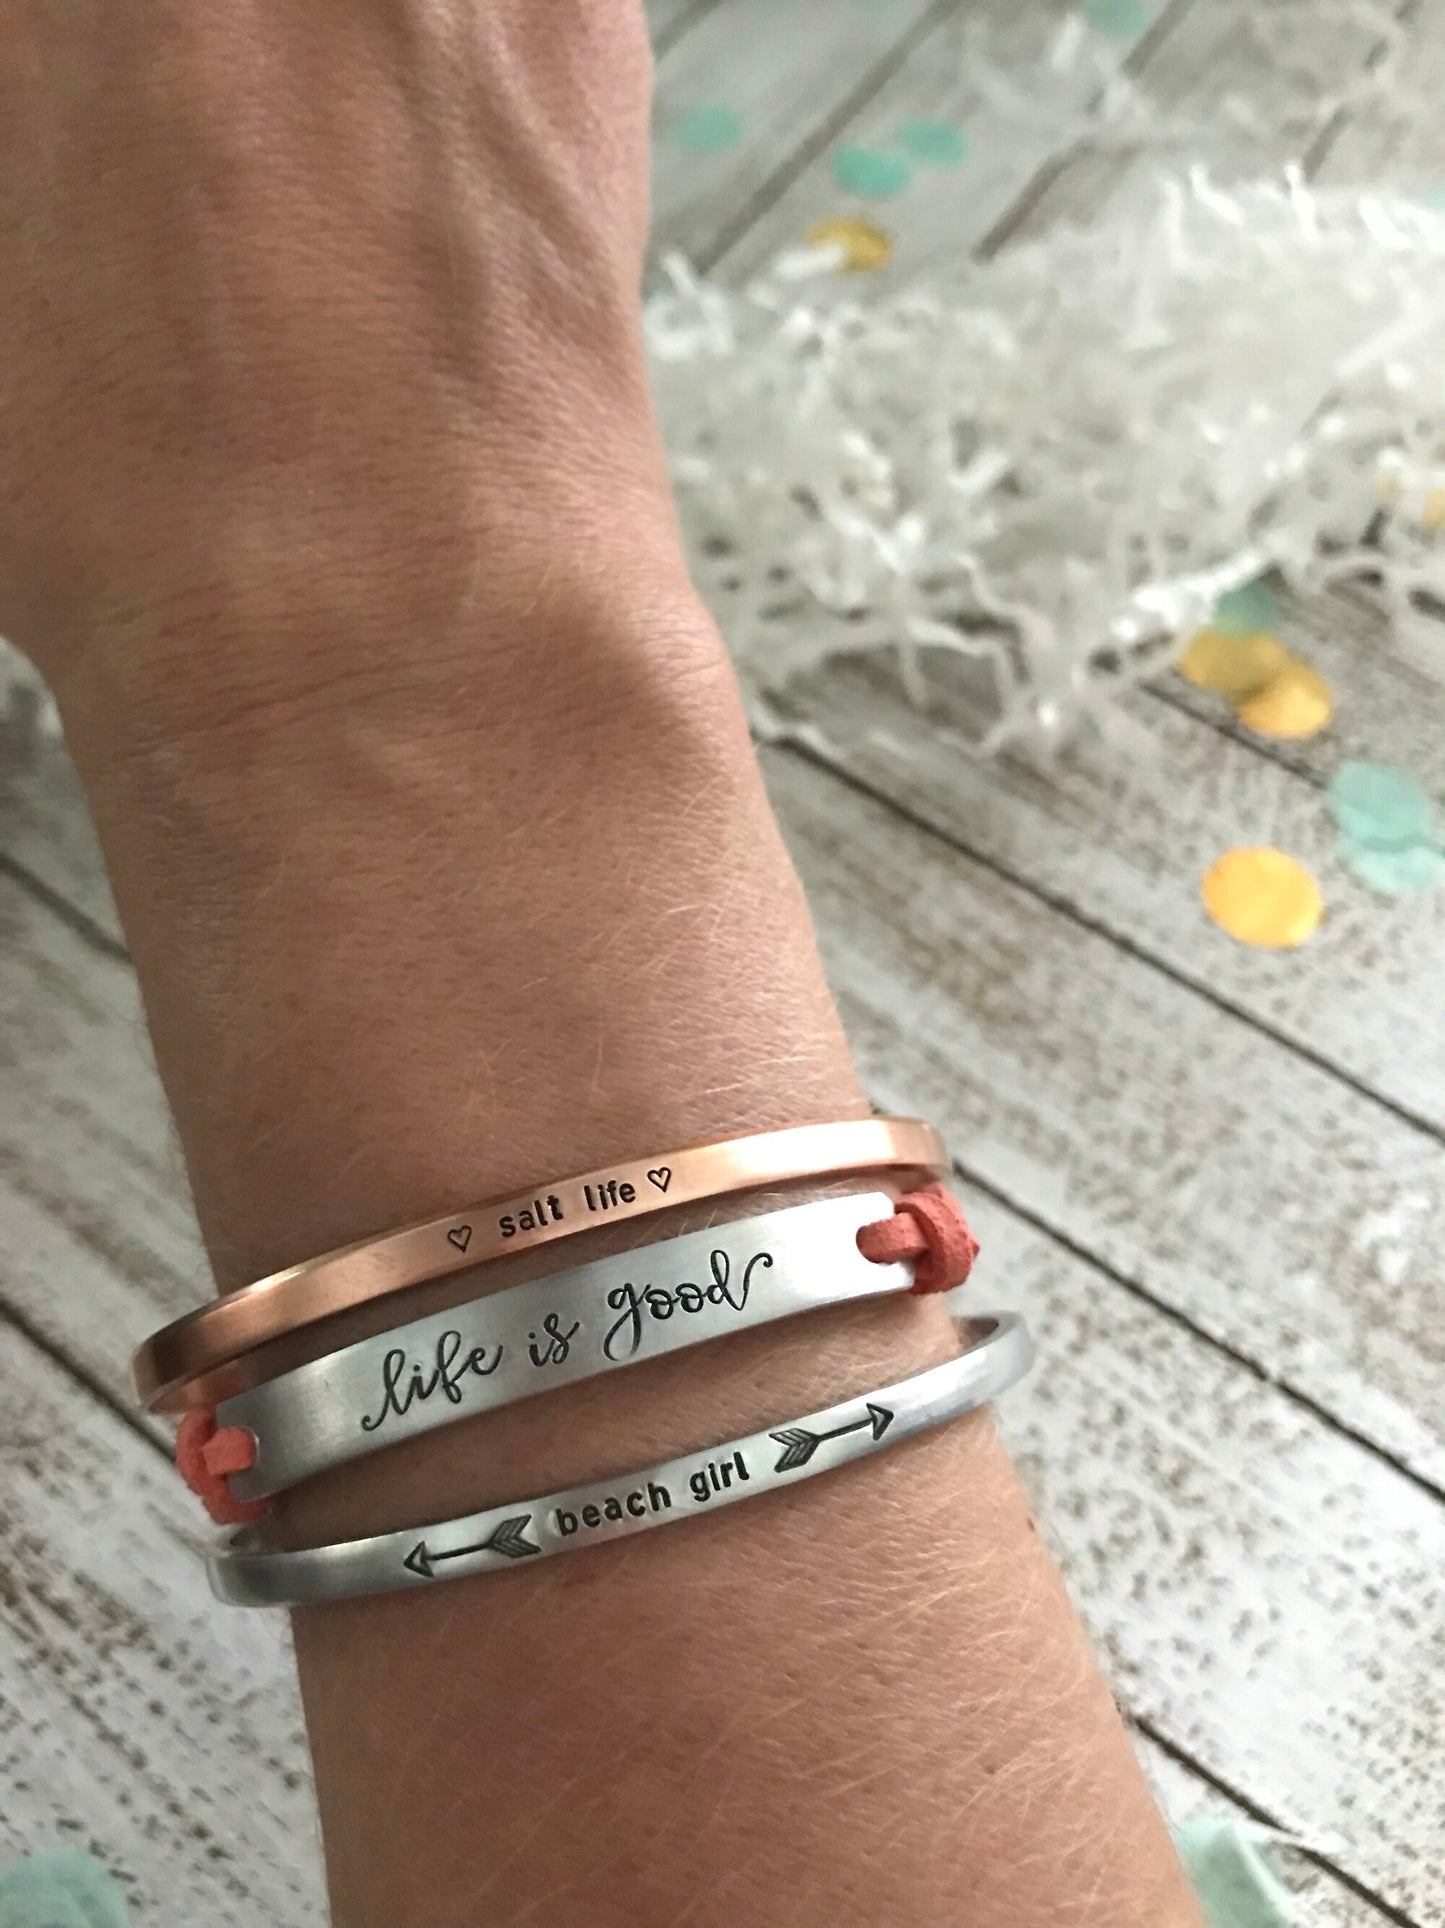 Live what you love--strong woman--inspirational jewelry--birthday gift--friend gift--religious jewelry--daily reminder--skinny silver cuff